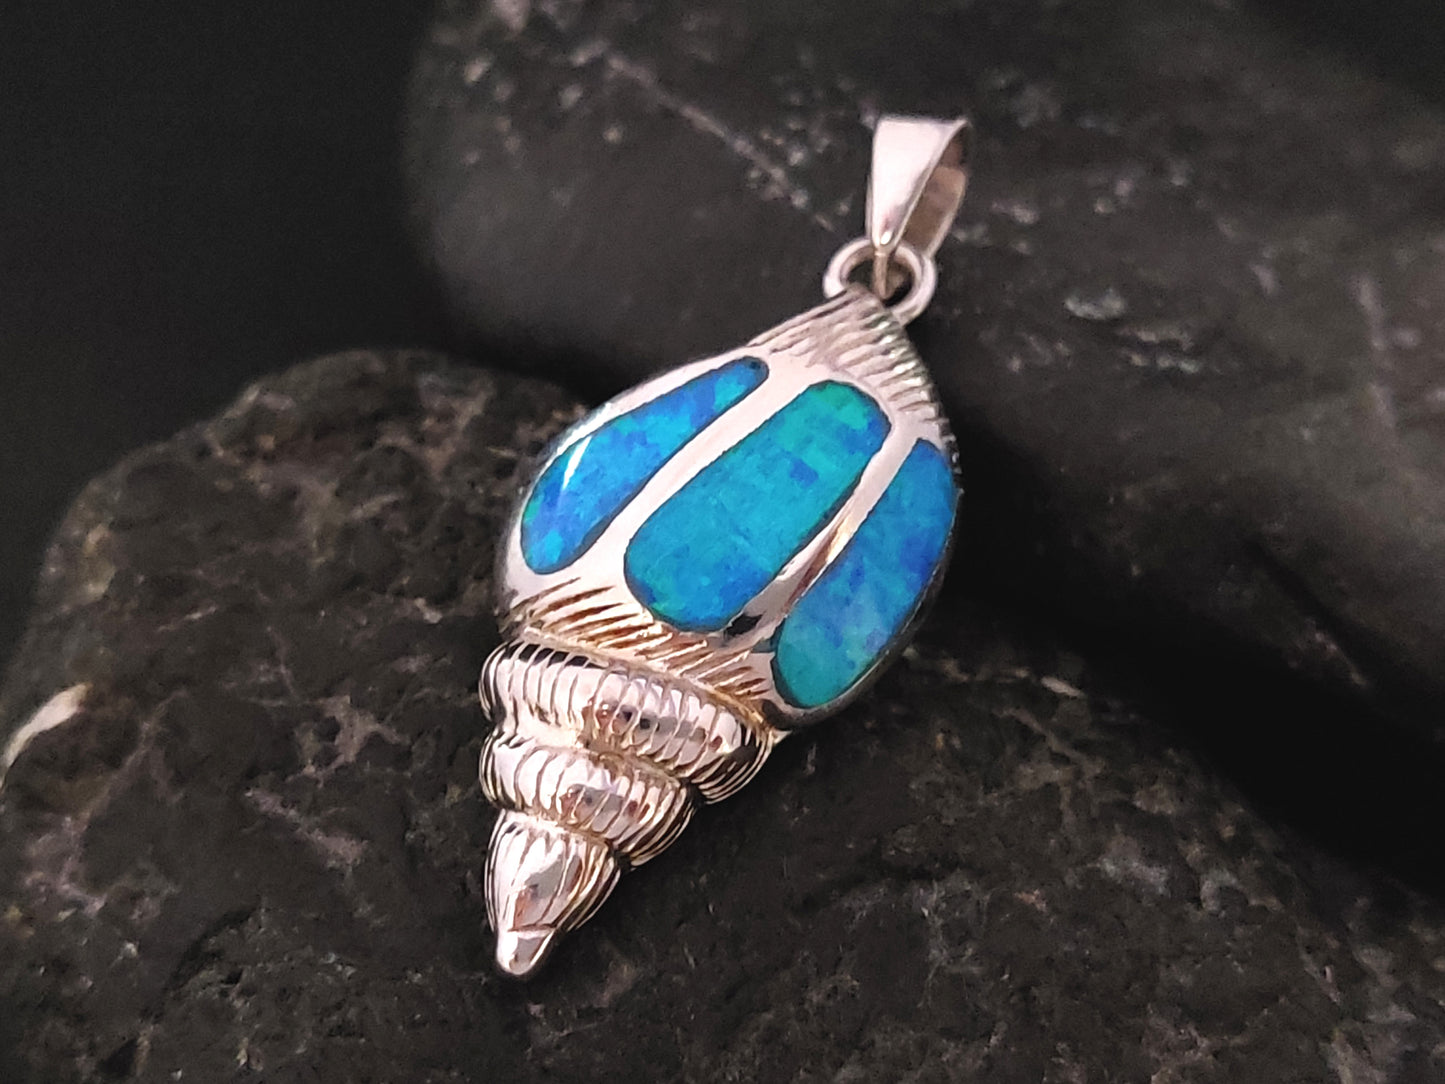 Sterling Silver 925 Seashell Pendant with Vibrant Blue Opal Stones, Handcrafted Greek Jewelry, 25 x 14 mm Pendant Size